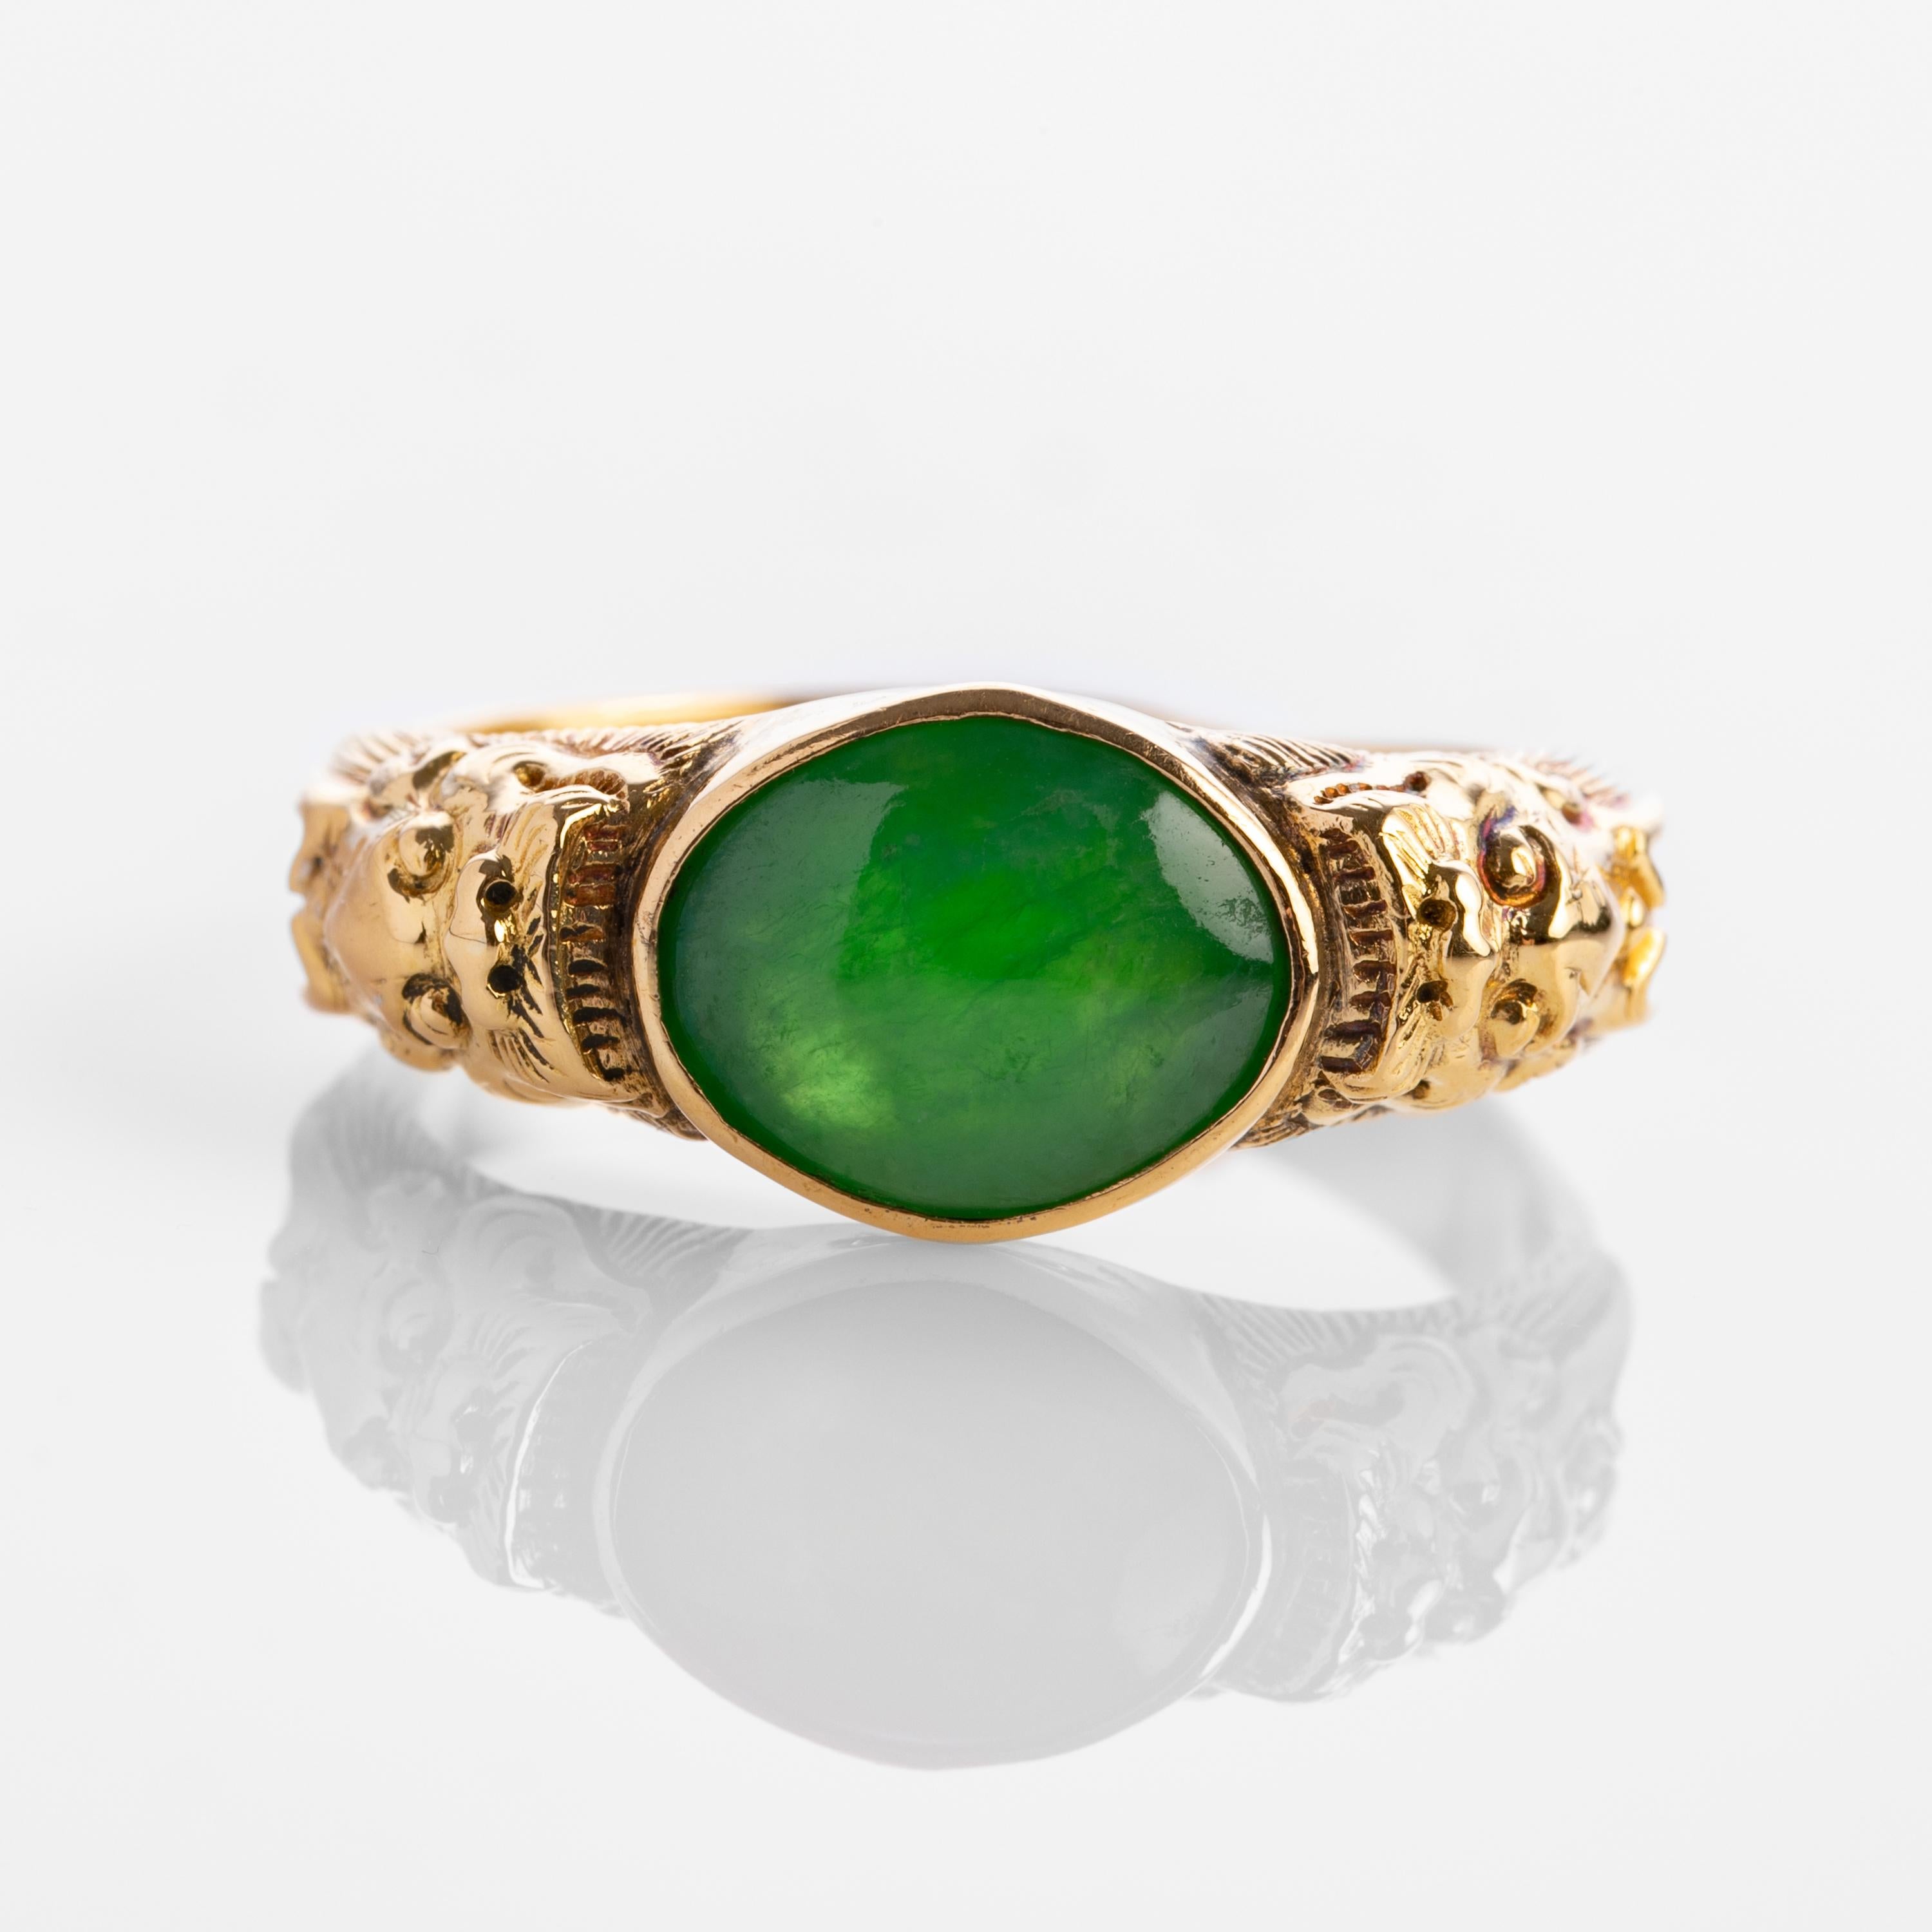 A fine antique ring rendered in sumptuous 20K yellow gold and featuring a 10.70mm x 8.60mm double cabochon of natural and untreated Burmese jadeite jade. The magnificent emerald-green jade stone has a beautiful antique polish that was created